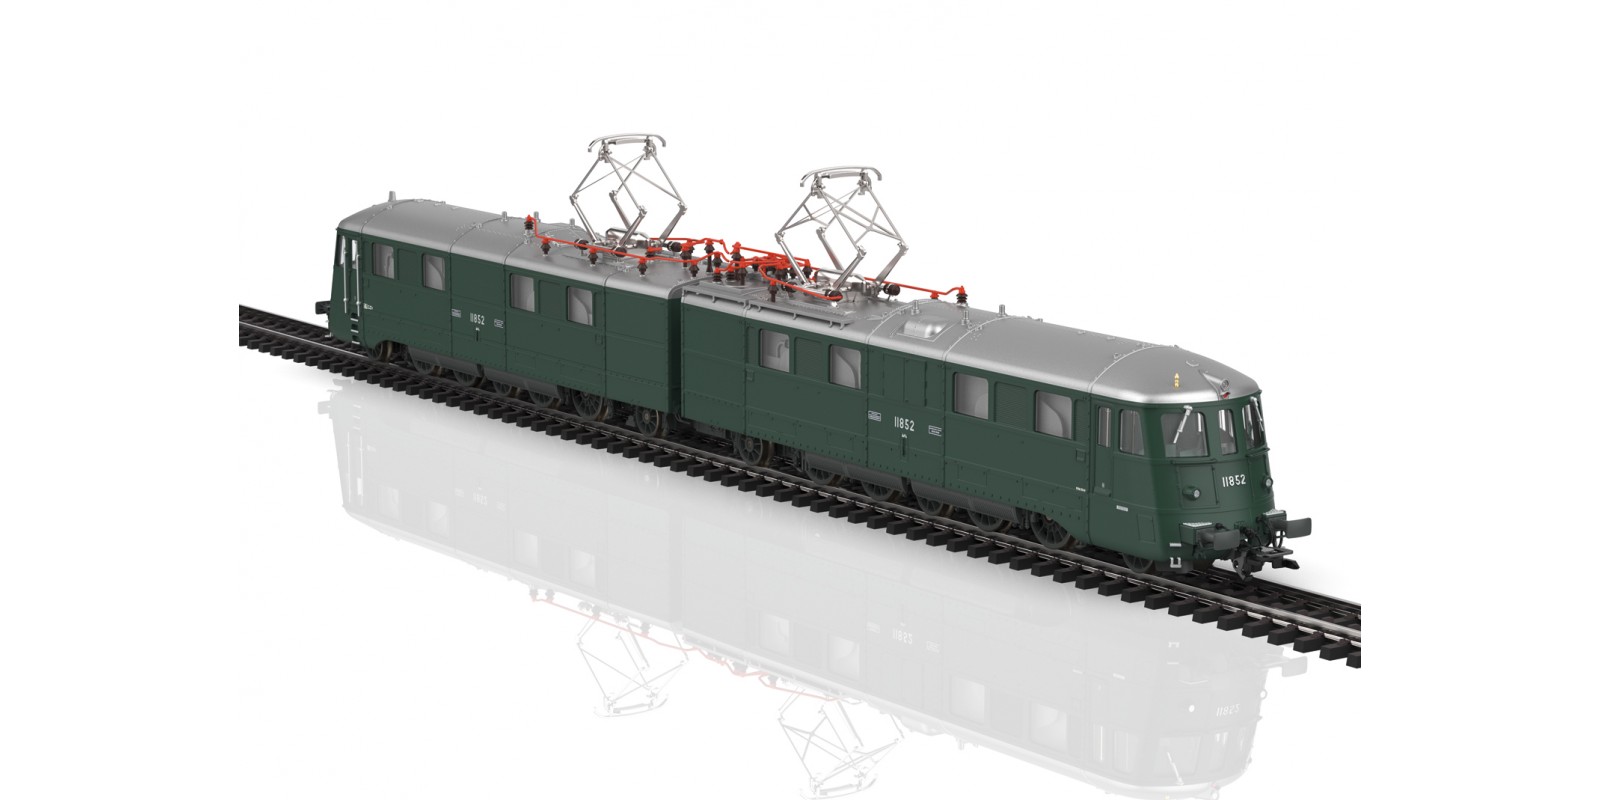 38590 Class Ae 8/14 Electric Locomotive, Road Number 11852